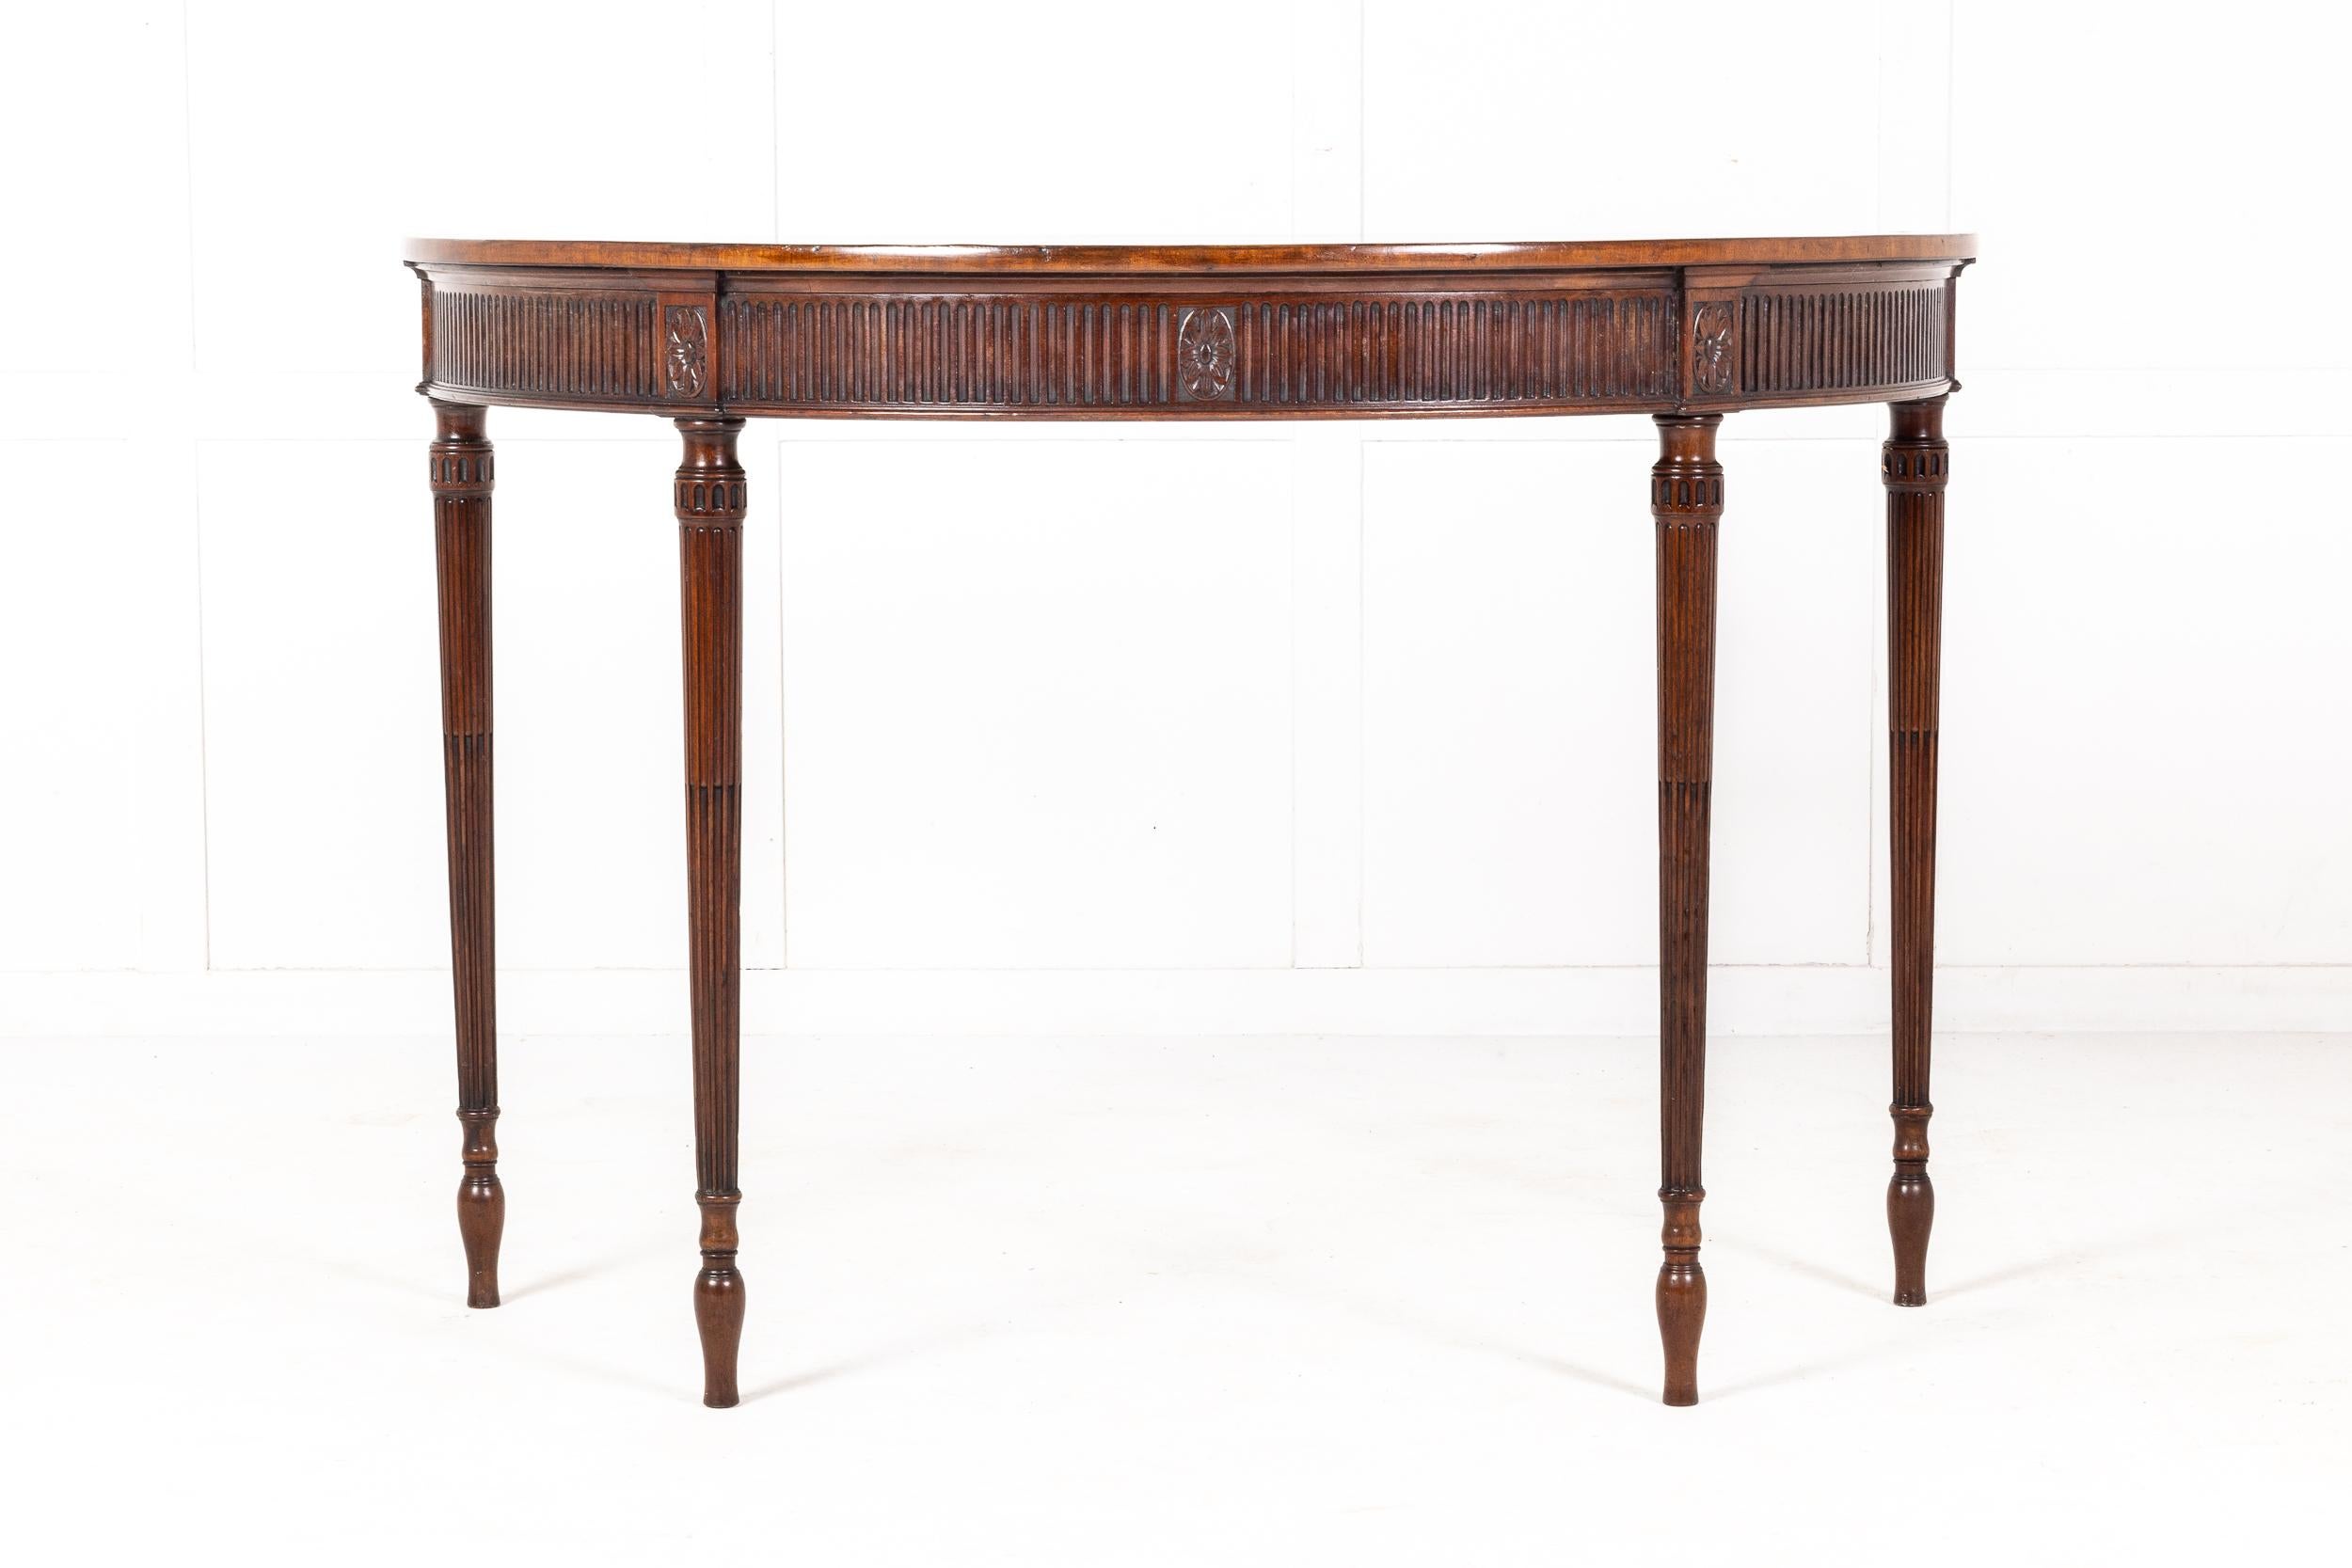 An excellent George III Mahogany Side/Pier Table in the Manner of Thomas Chippendale or Mayhew and Ince, having a finely figured mahogany top of excellent colour, cross banded in satinwood, above a fluted frieze with five finely carved paterae, one